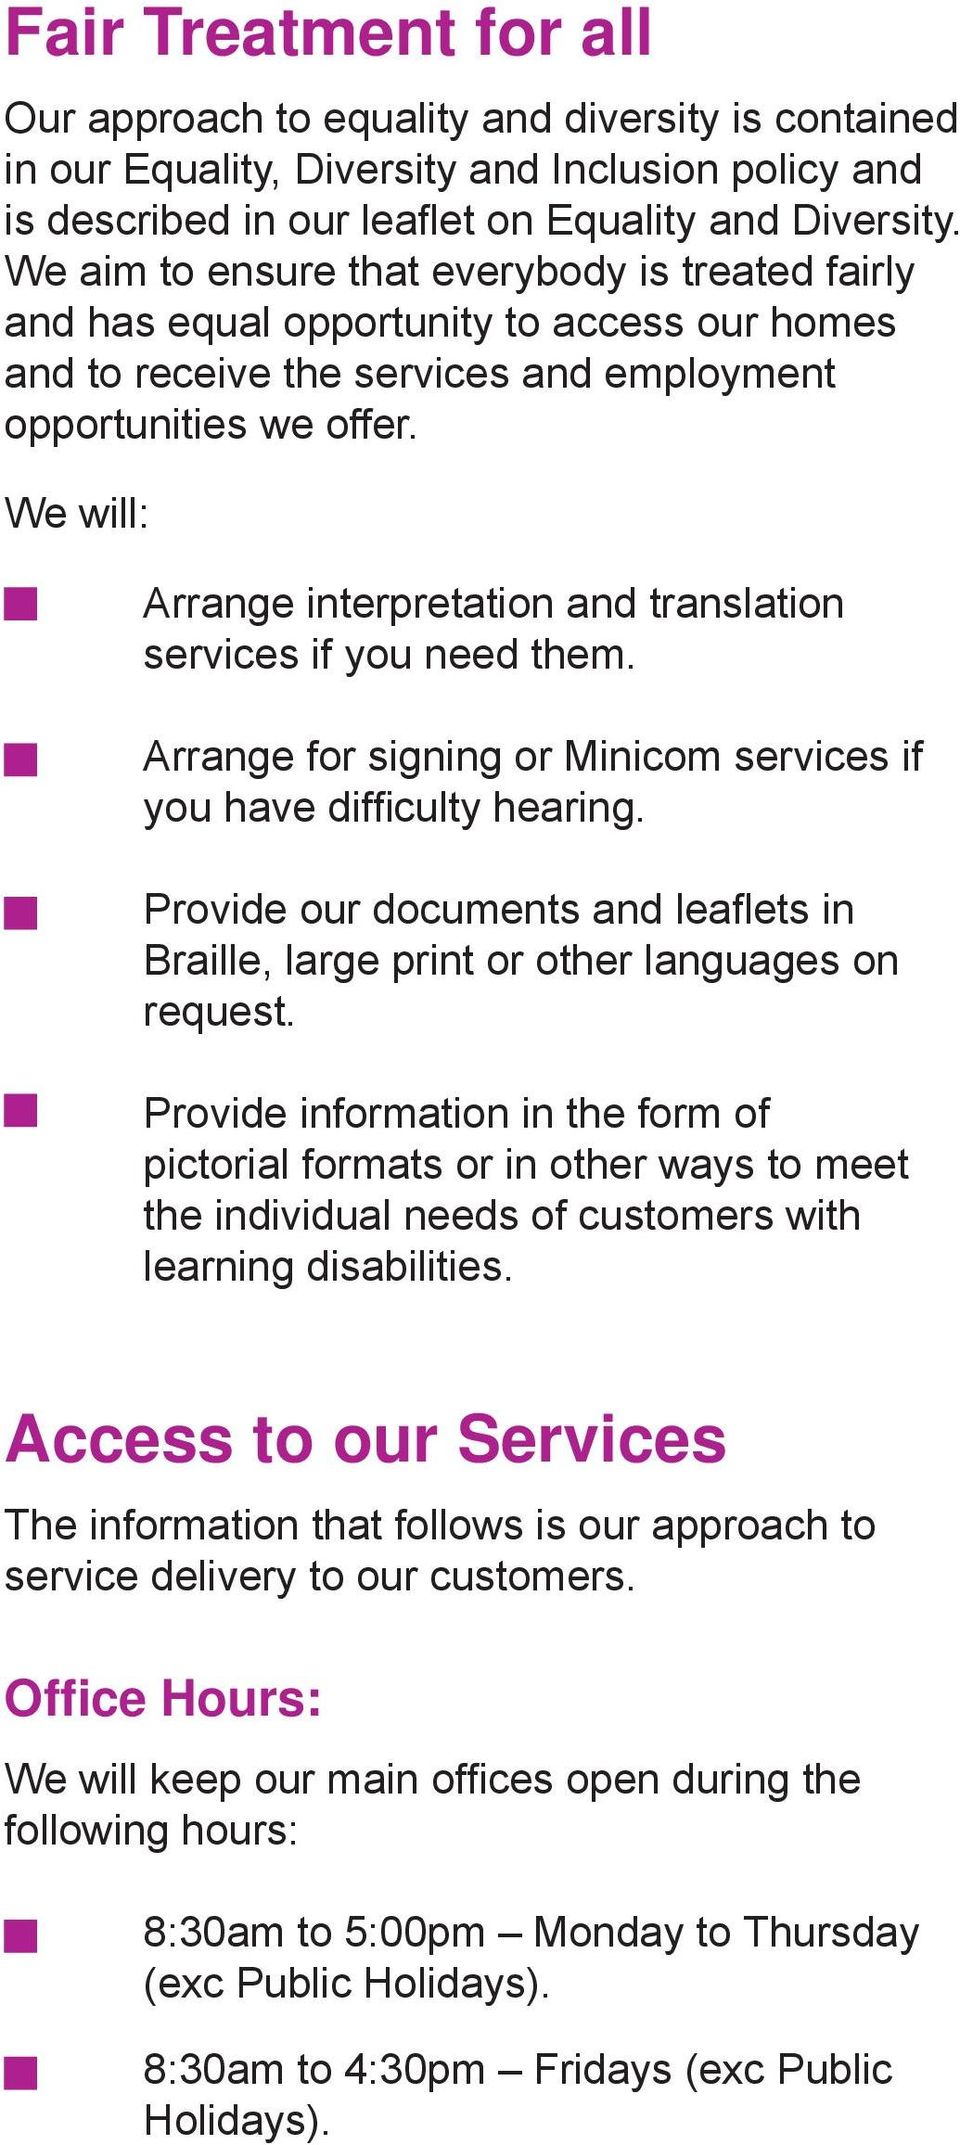 Arrange interpretation and translation services if you need them. Arrange for signing or Minicom services if you have diffi culty hearing.